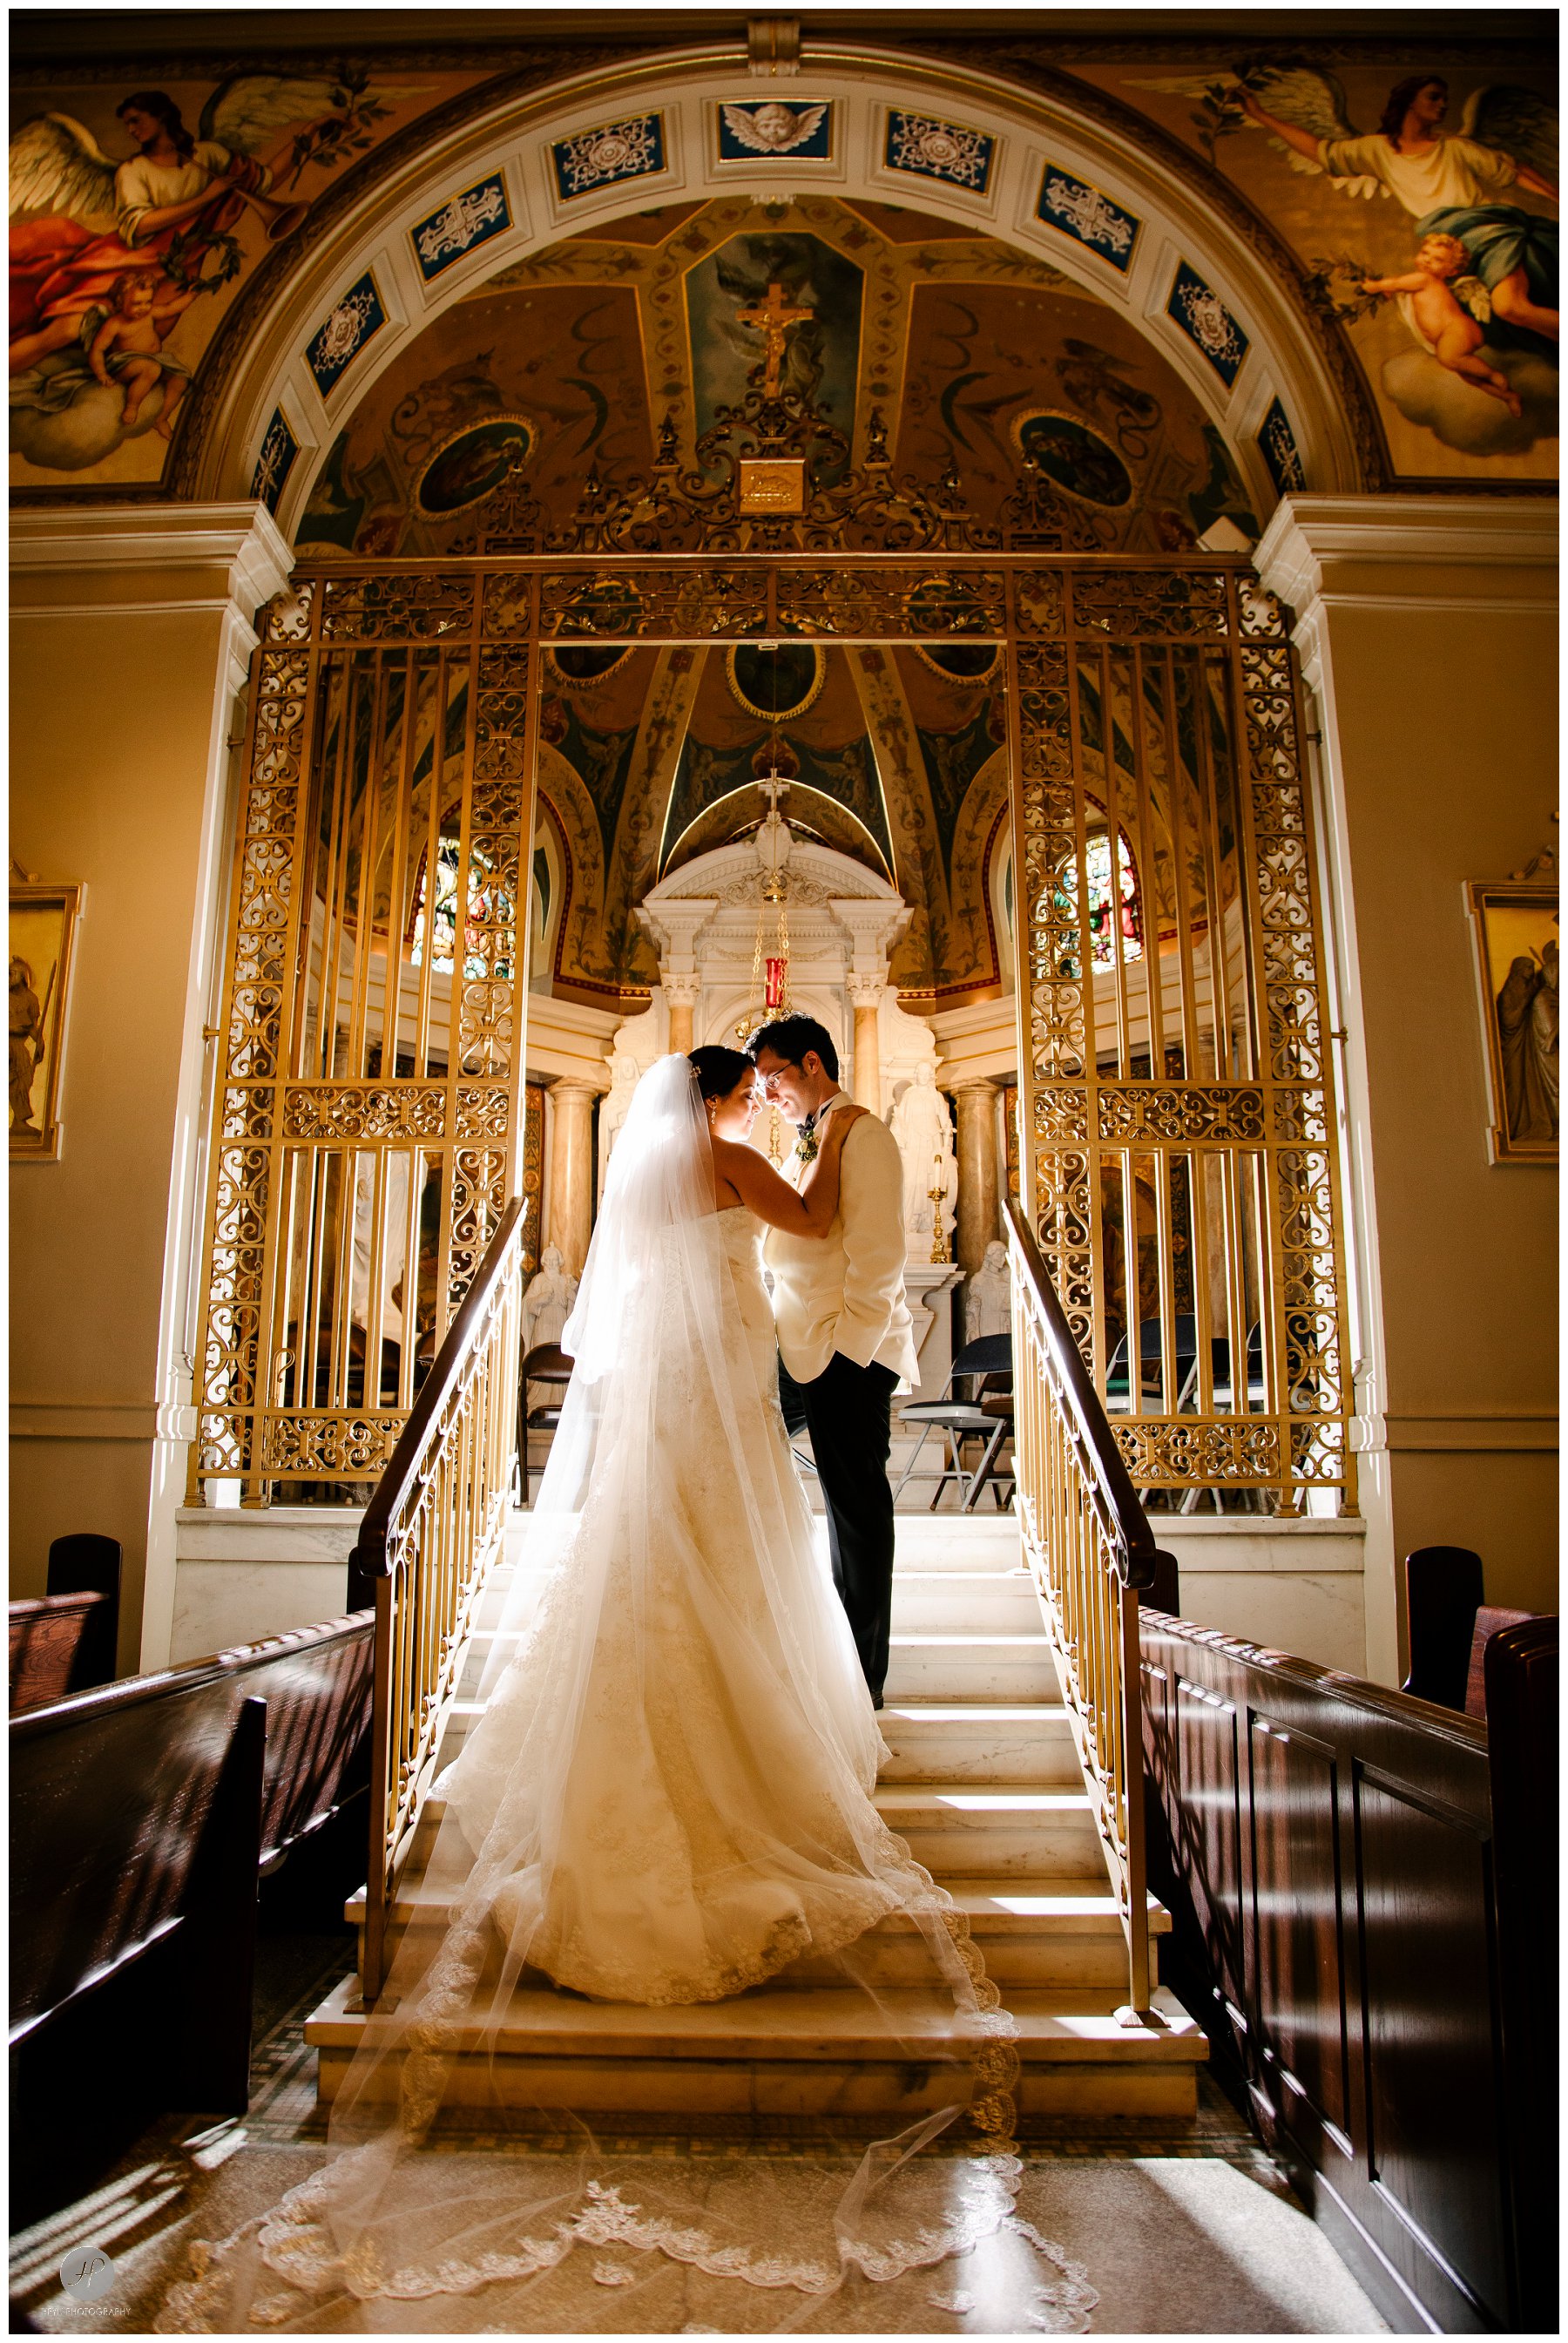 romantic dramatic photo of bride and groom inside cathedral